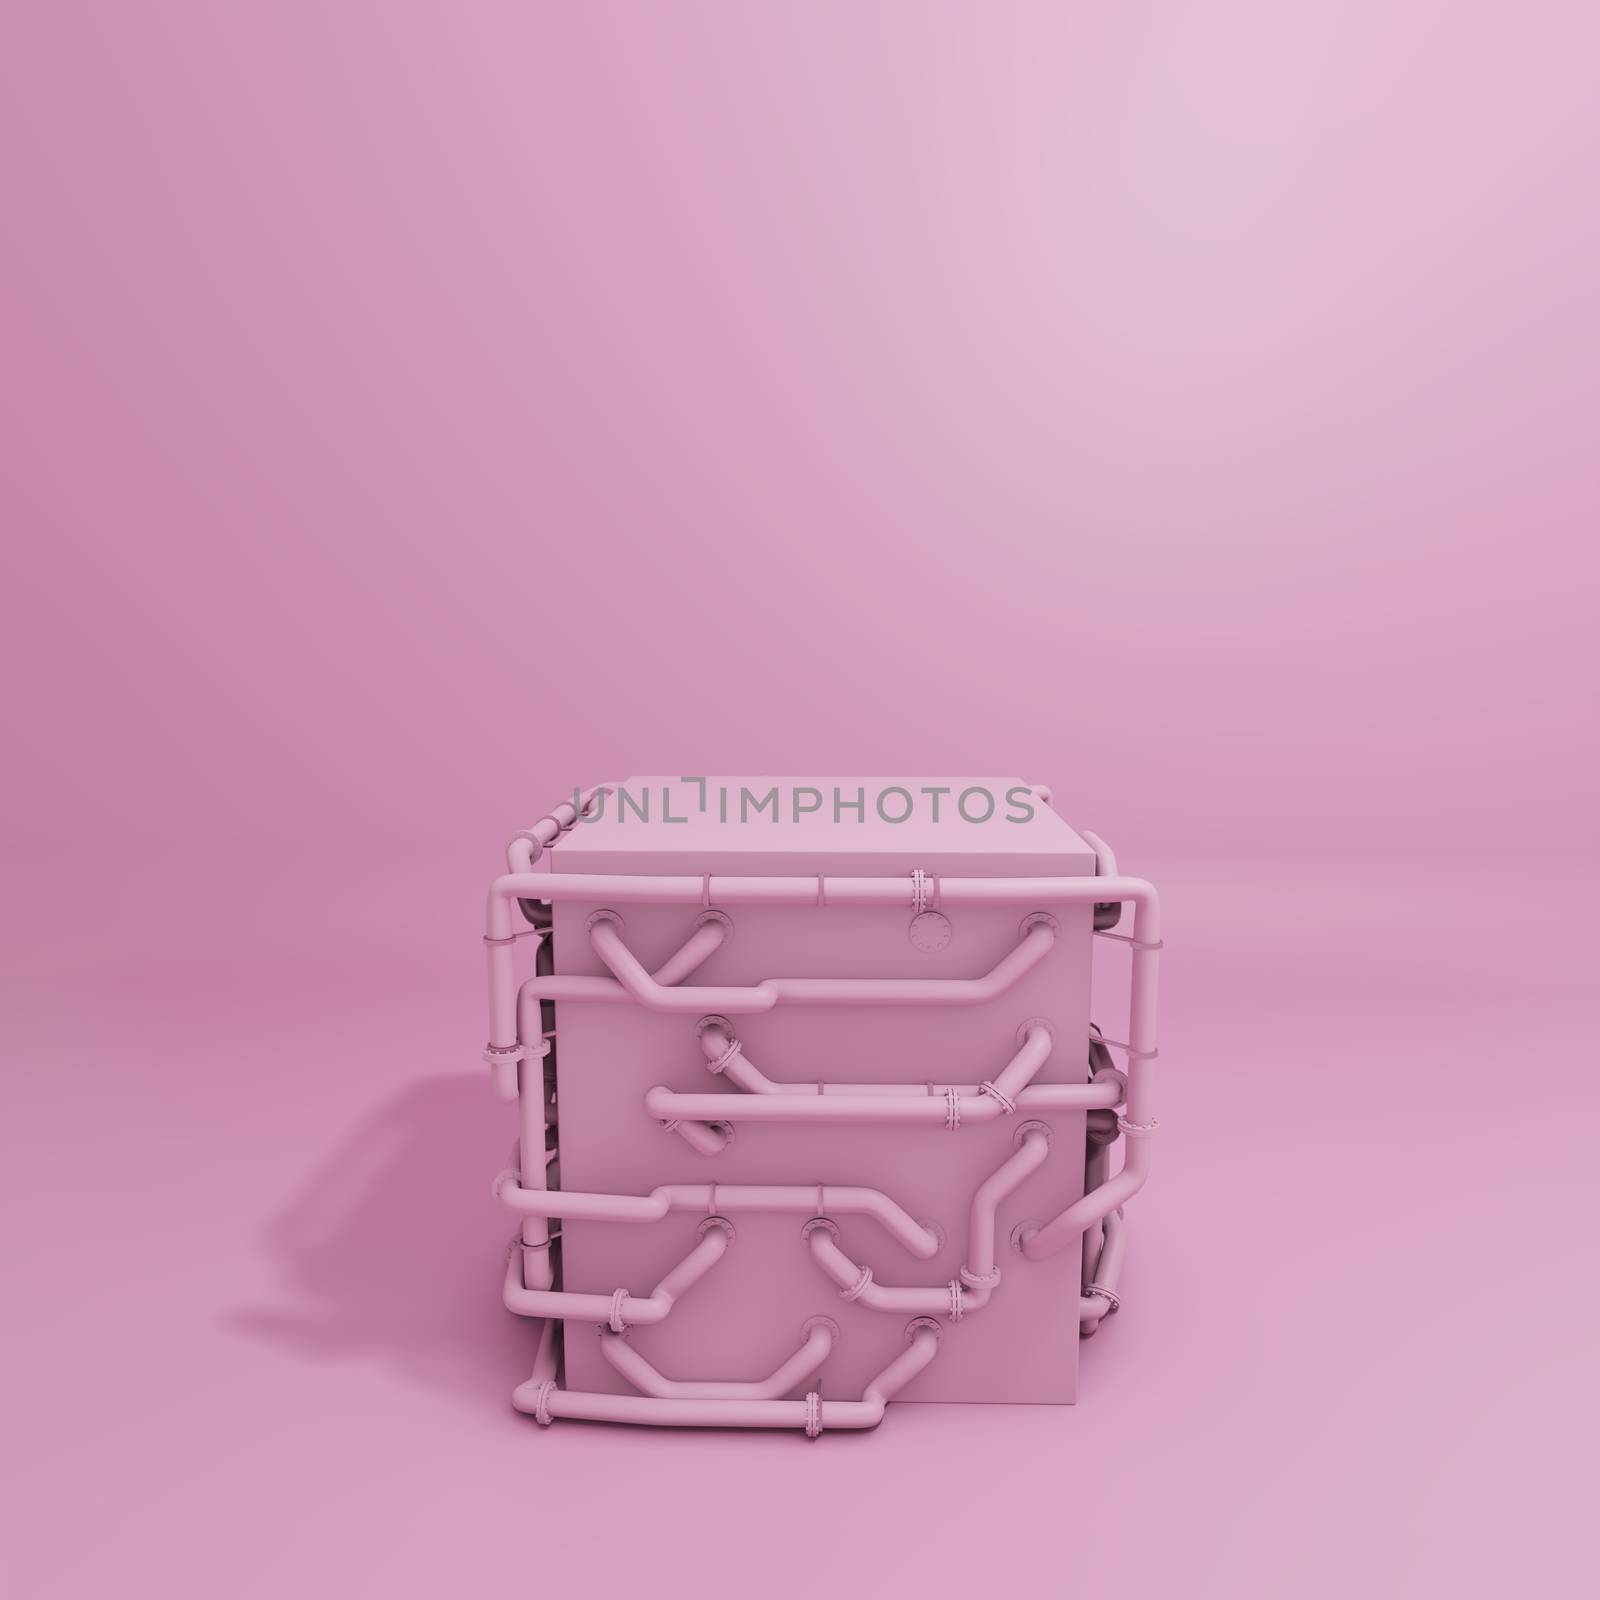 Pink Pastel Product Box Stand With Pipes. 3D Rendering. Beauty Industrial Concept